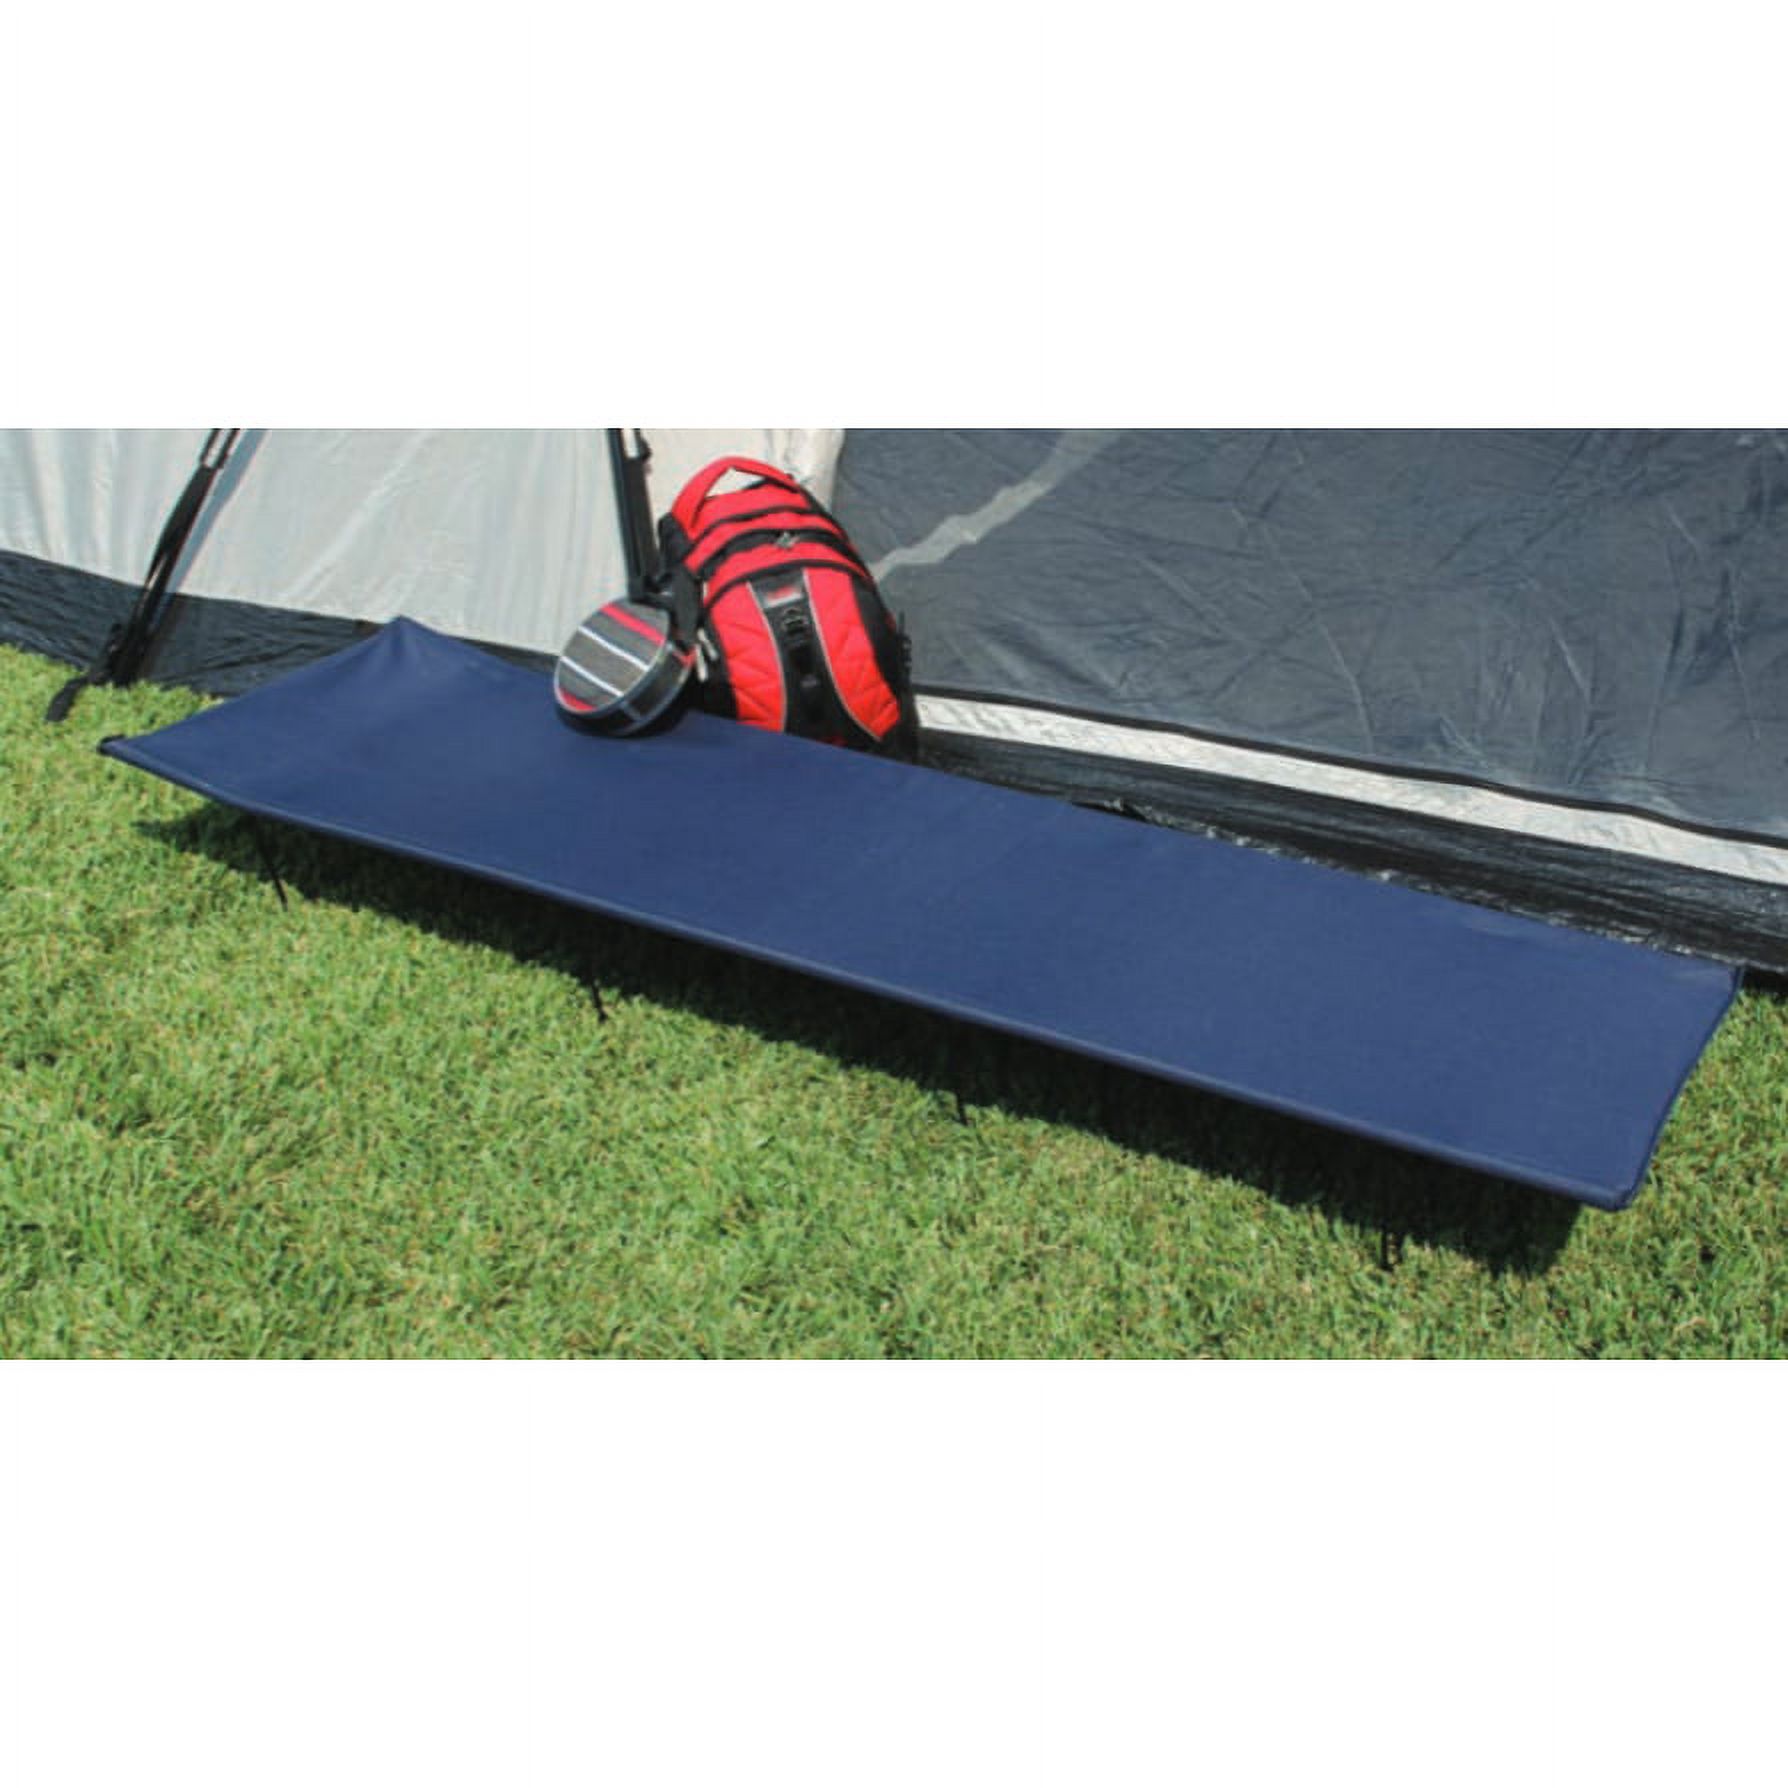 Texsport Collapsible Steel Camp Cot - image 1 of 2